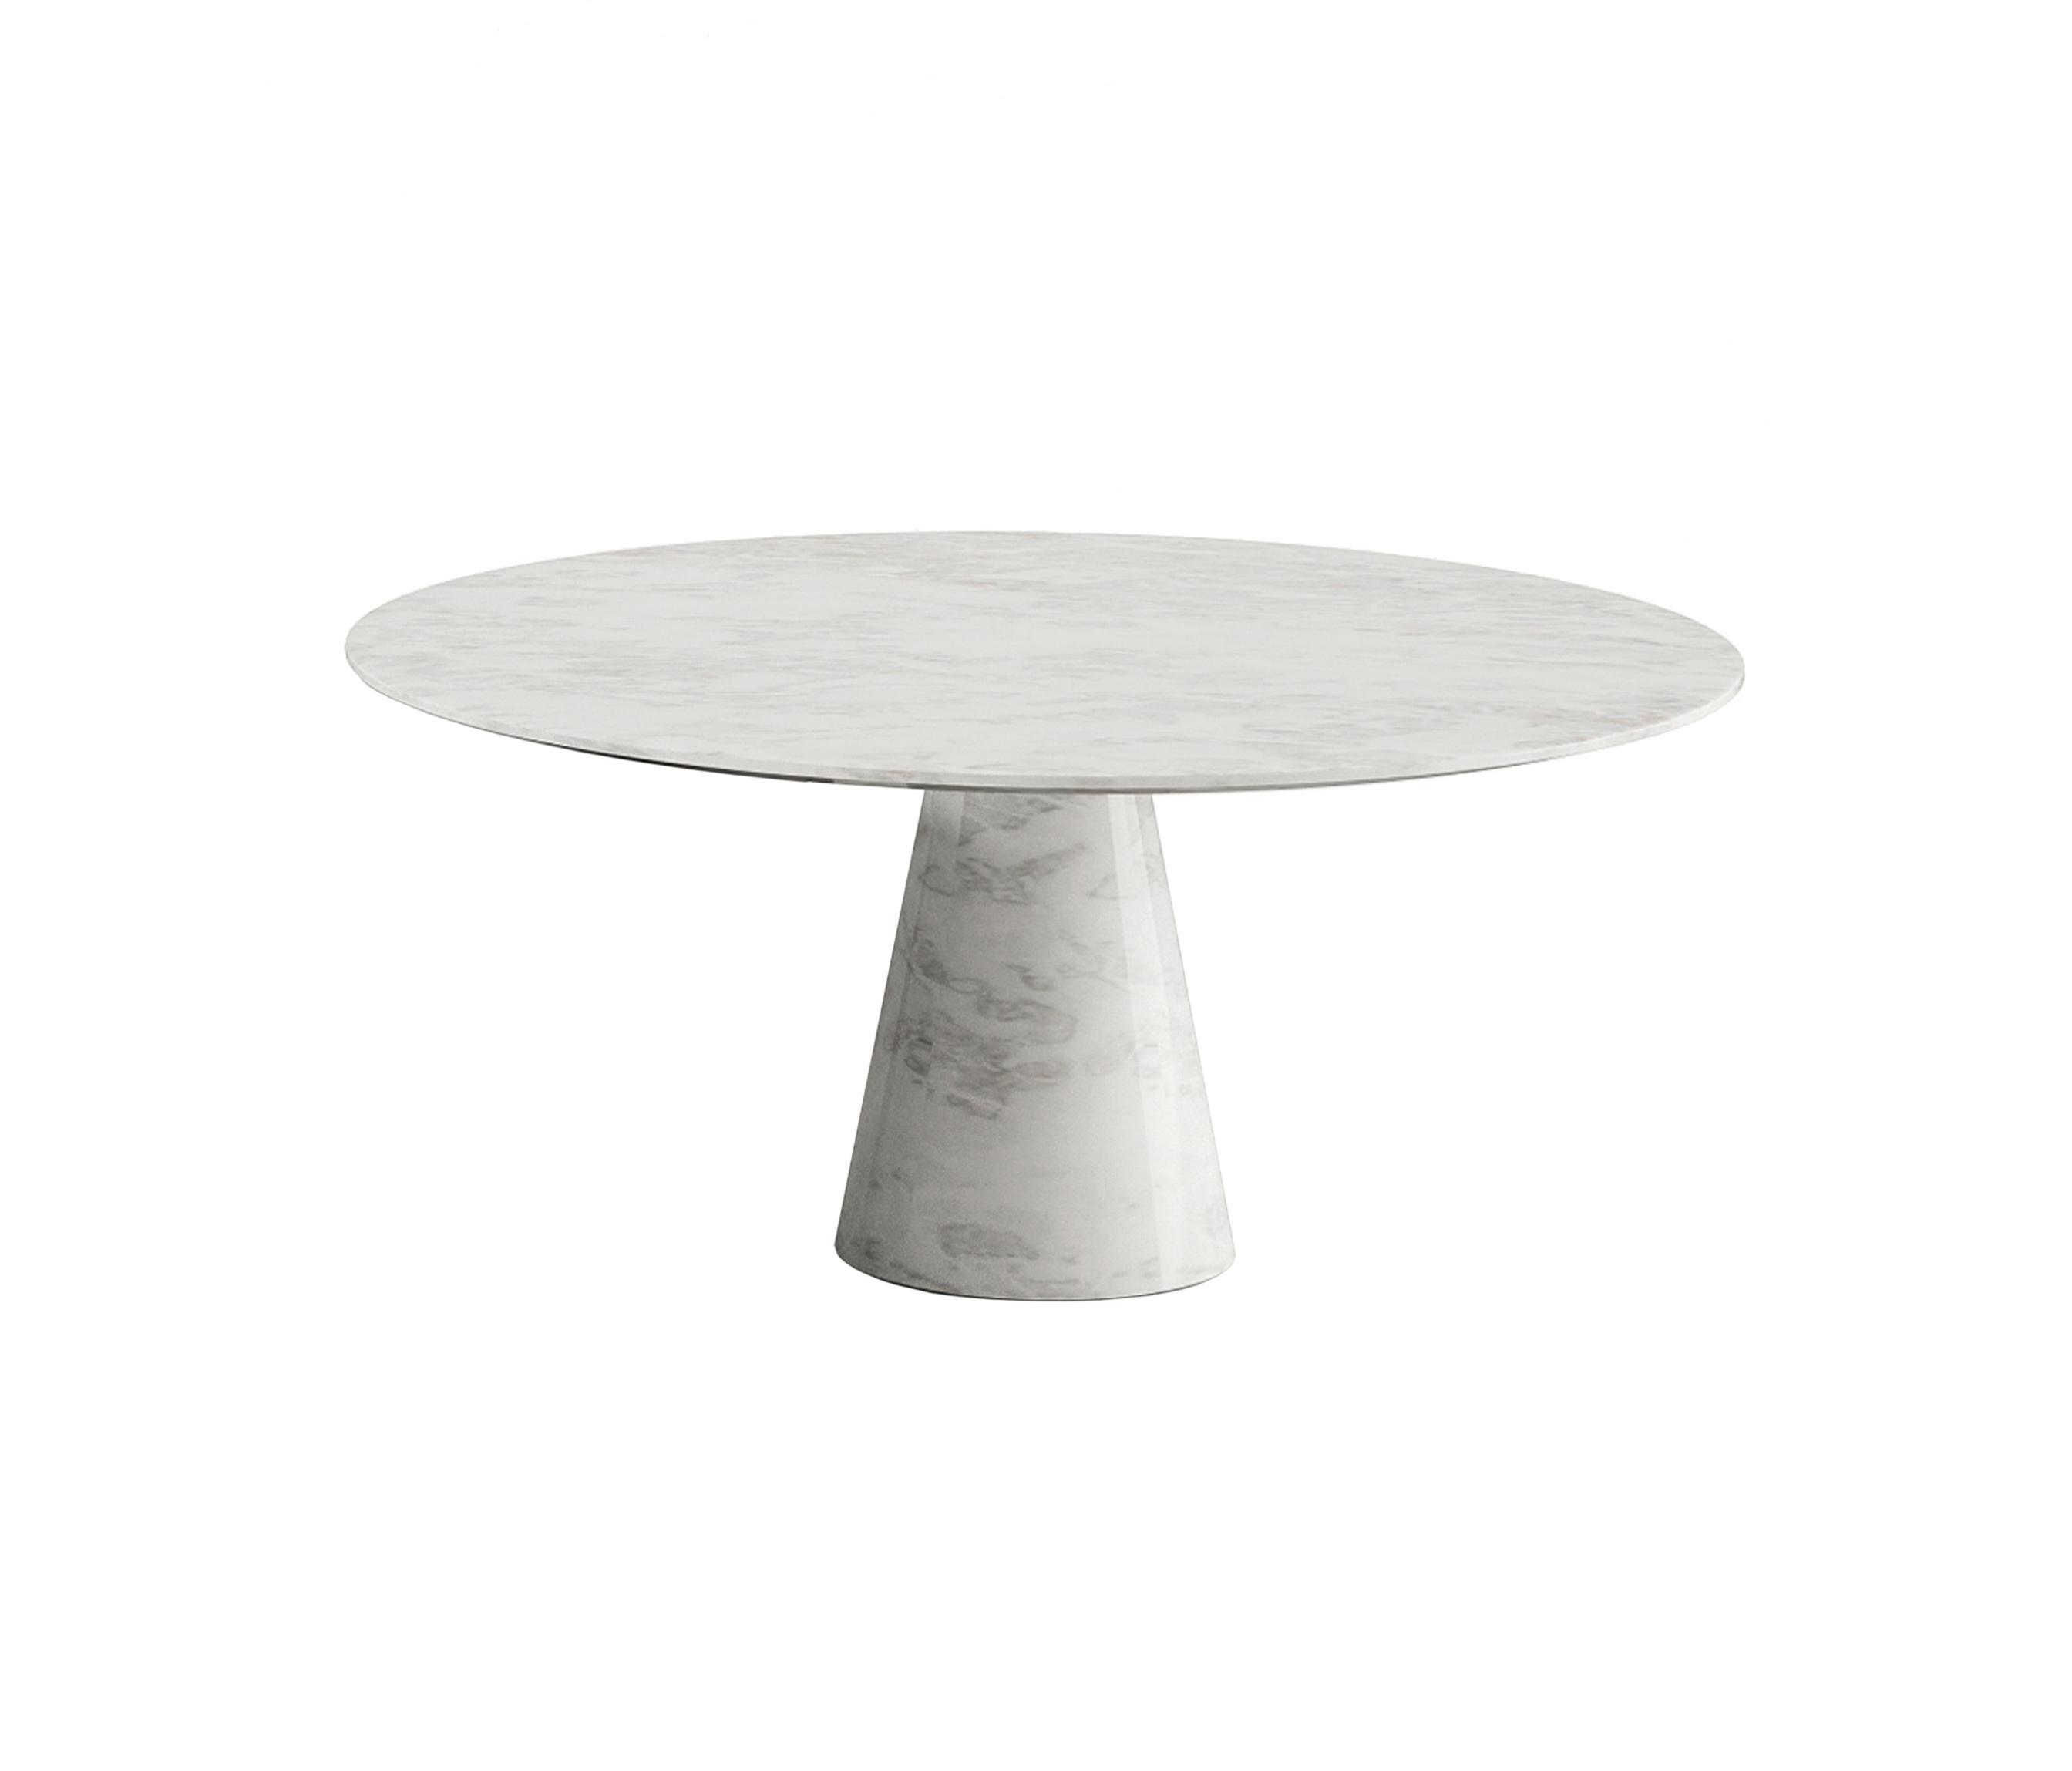 IDEE - Coffee tables from ENNE | Architonic